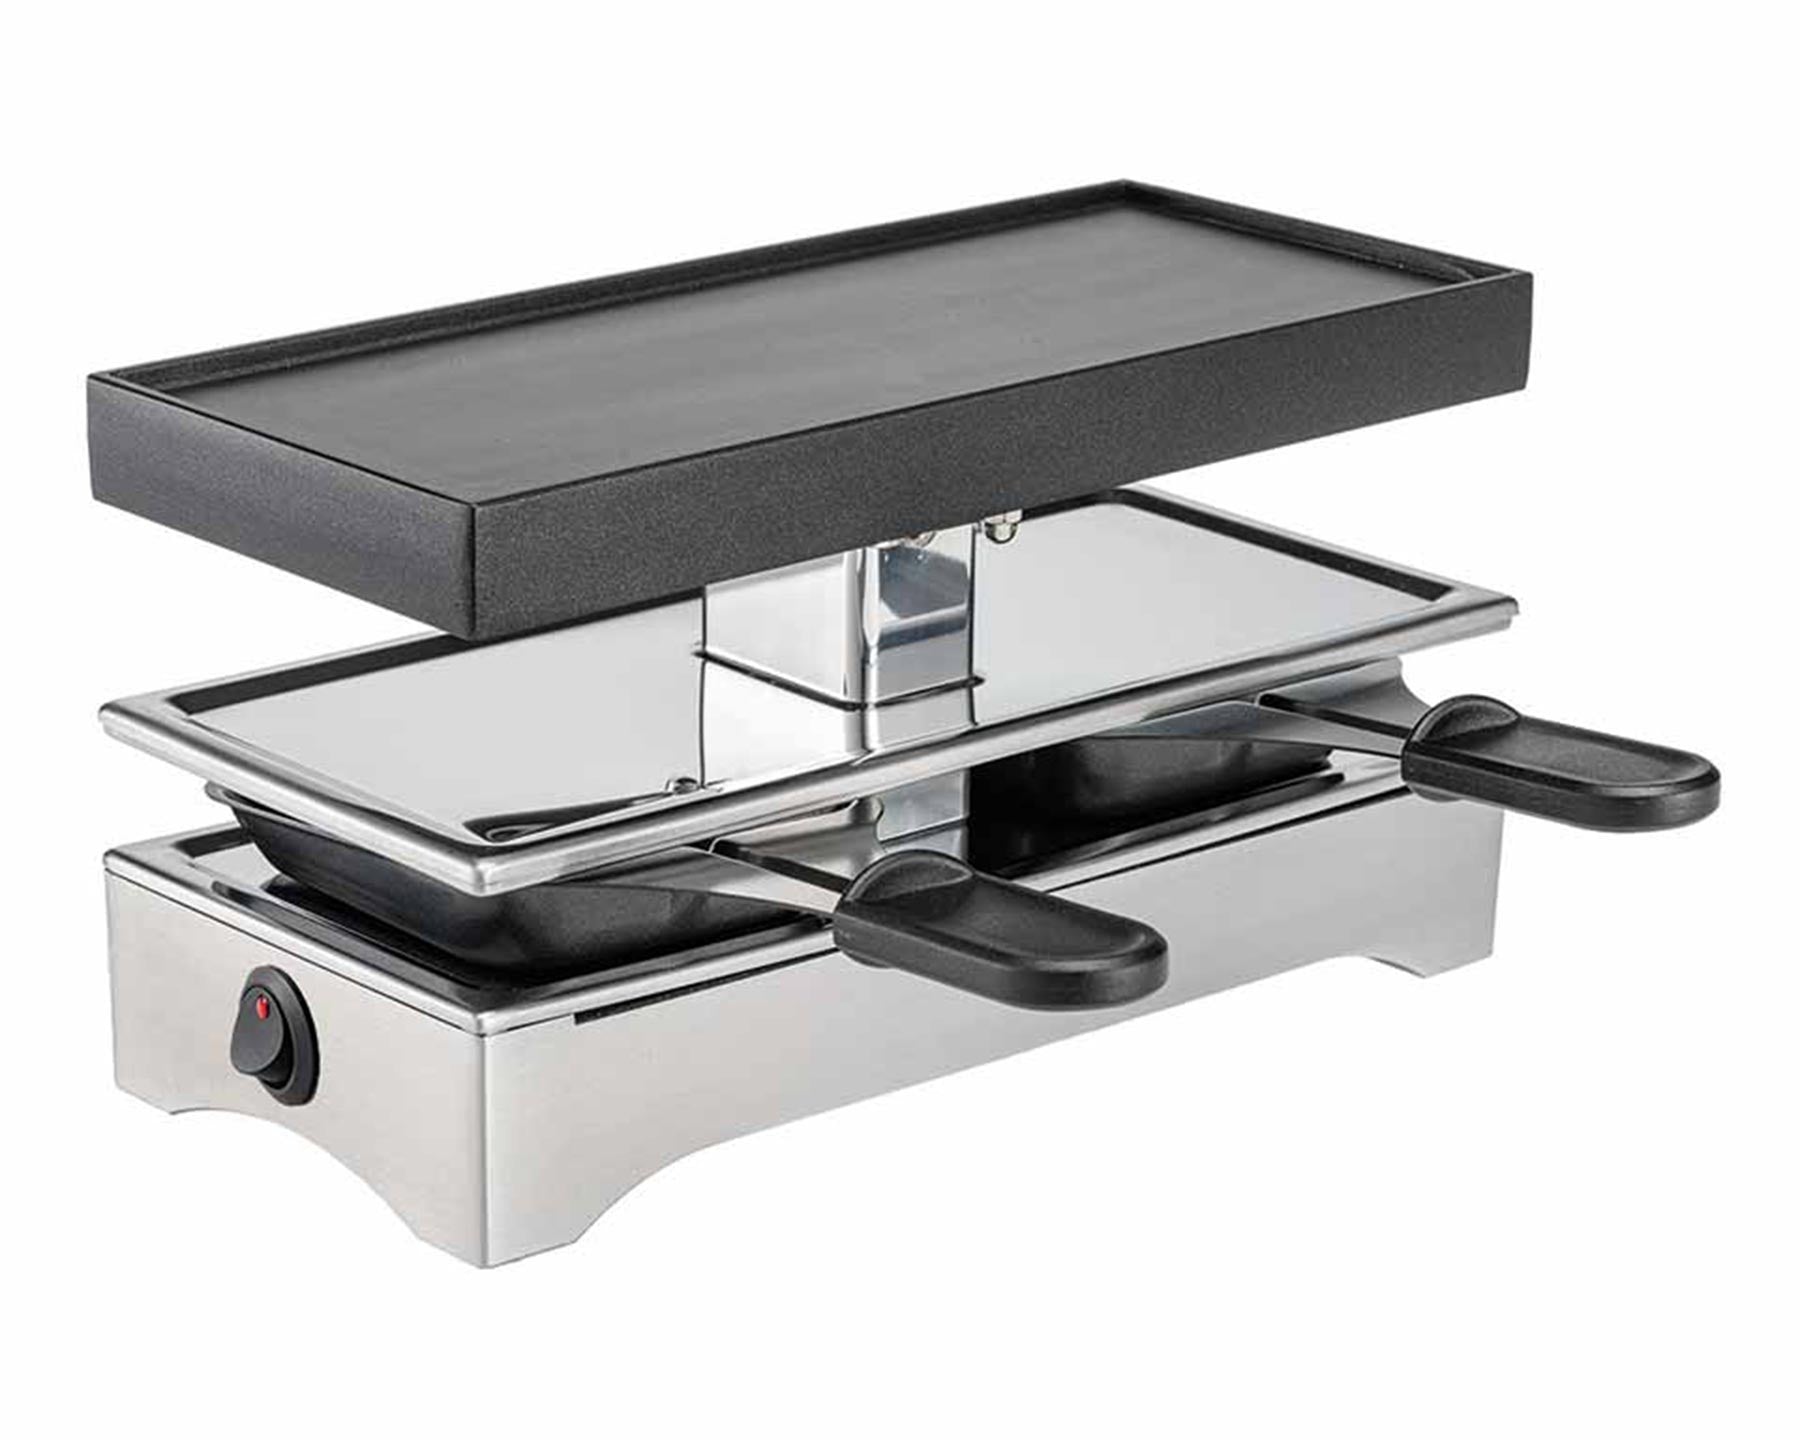 Raclette 1 or 2 - kitchen-more.ch